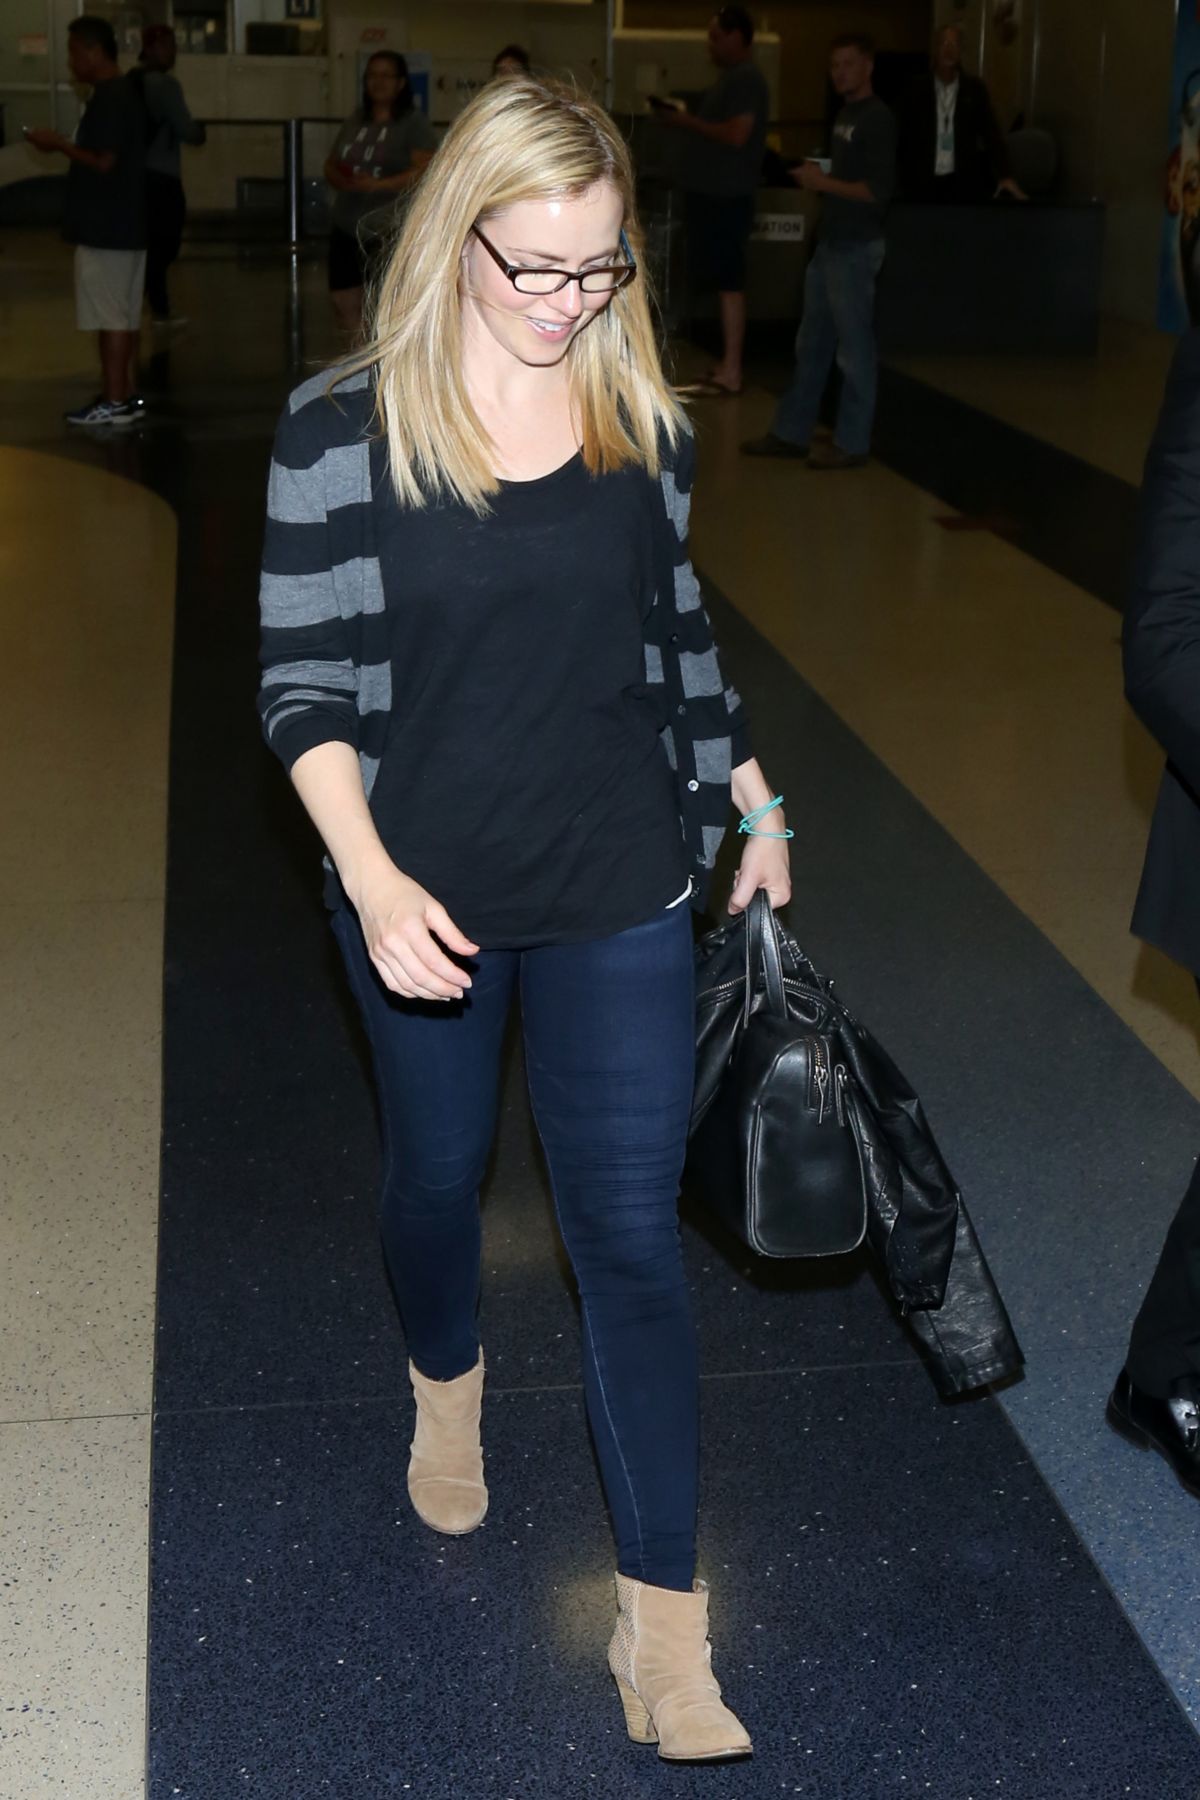 AMANDA SCHULL at LAX Airport in Los Angeles 04/24/2016